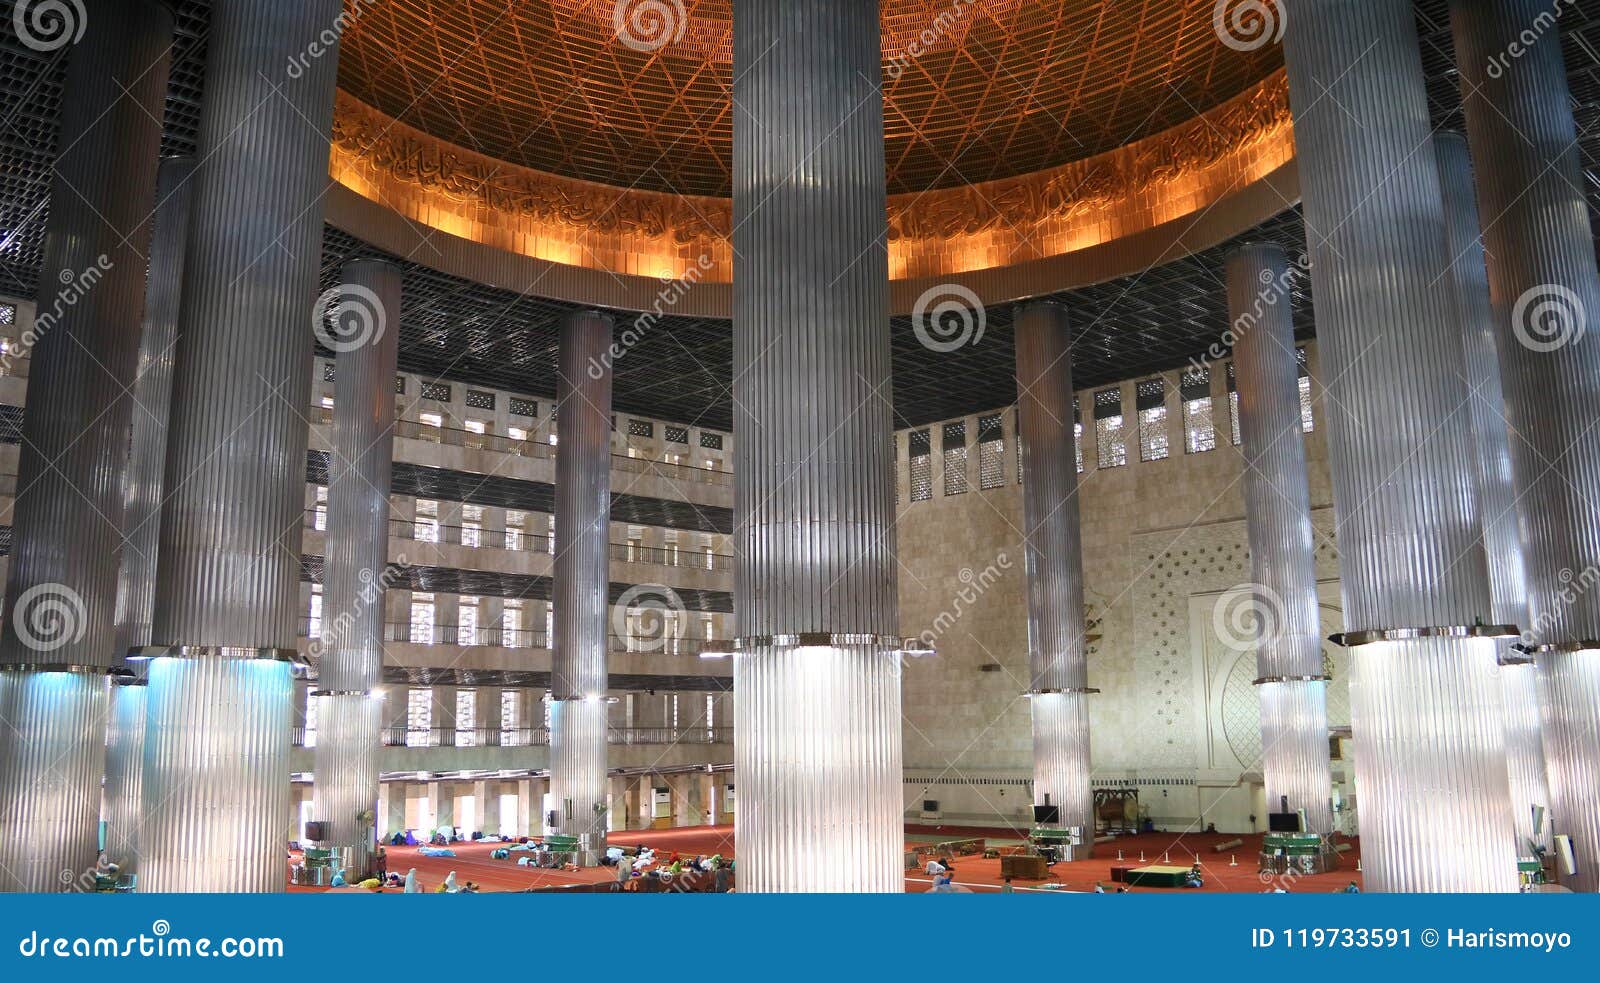  Interior  Of Istiqlal Mosque Editorial Photo Image of 